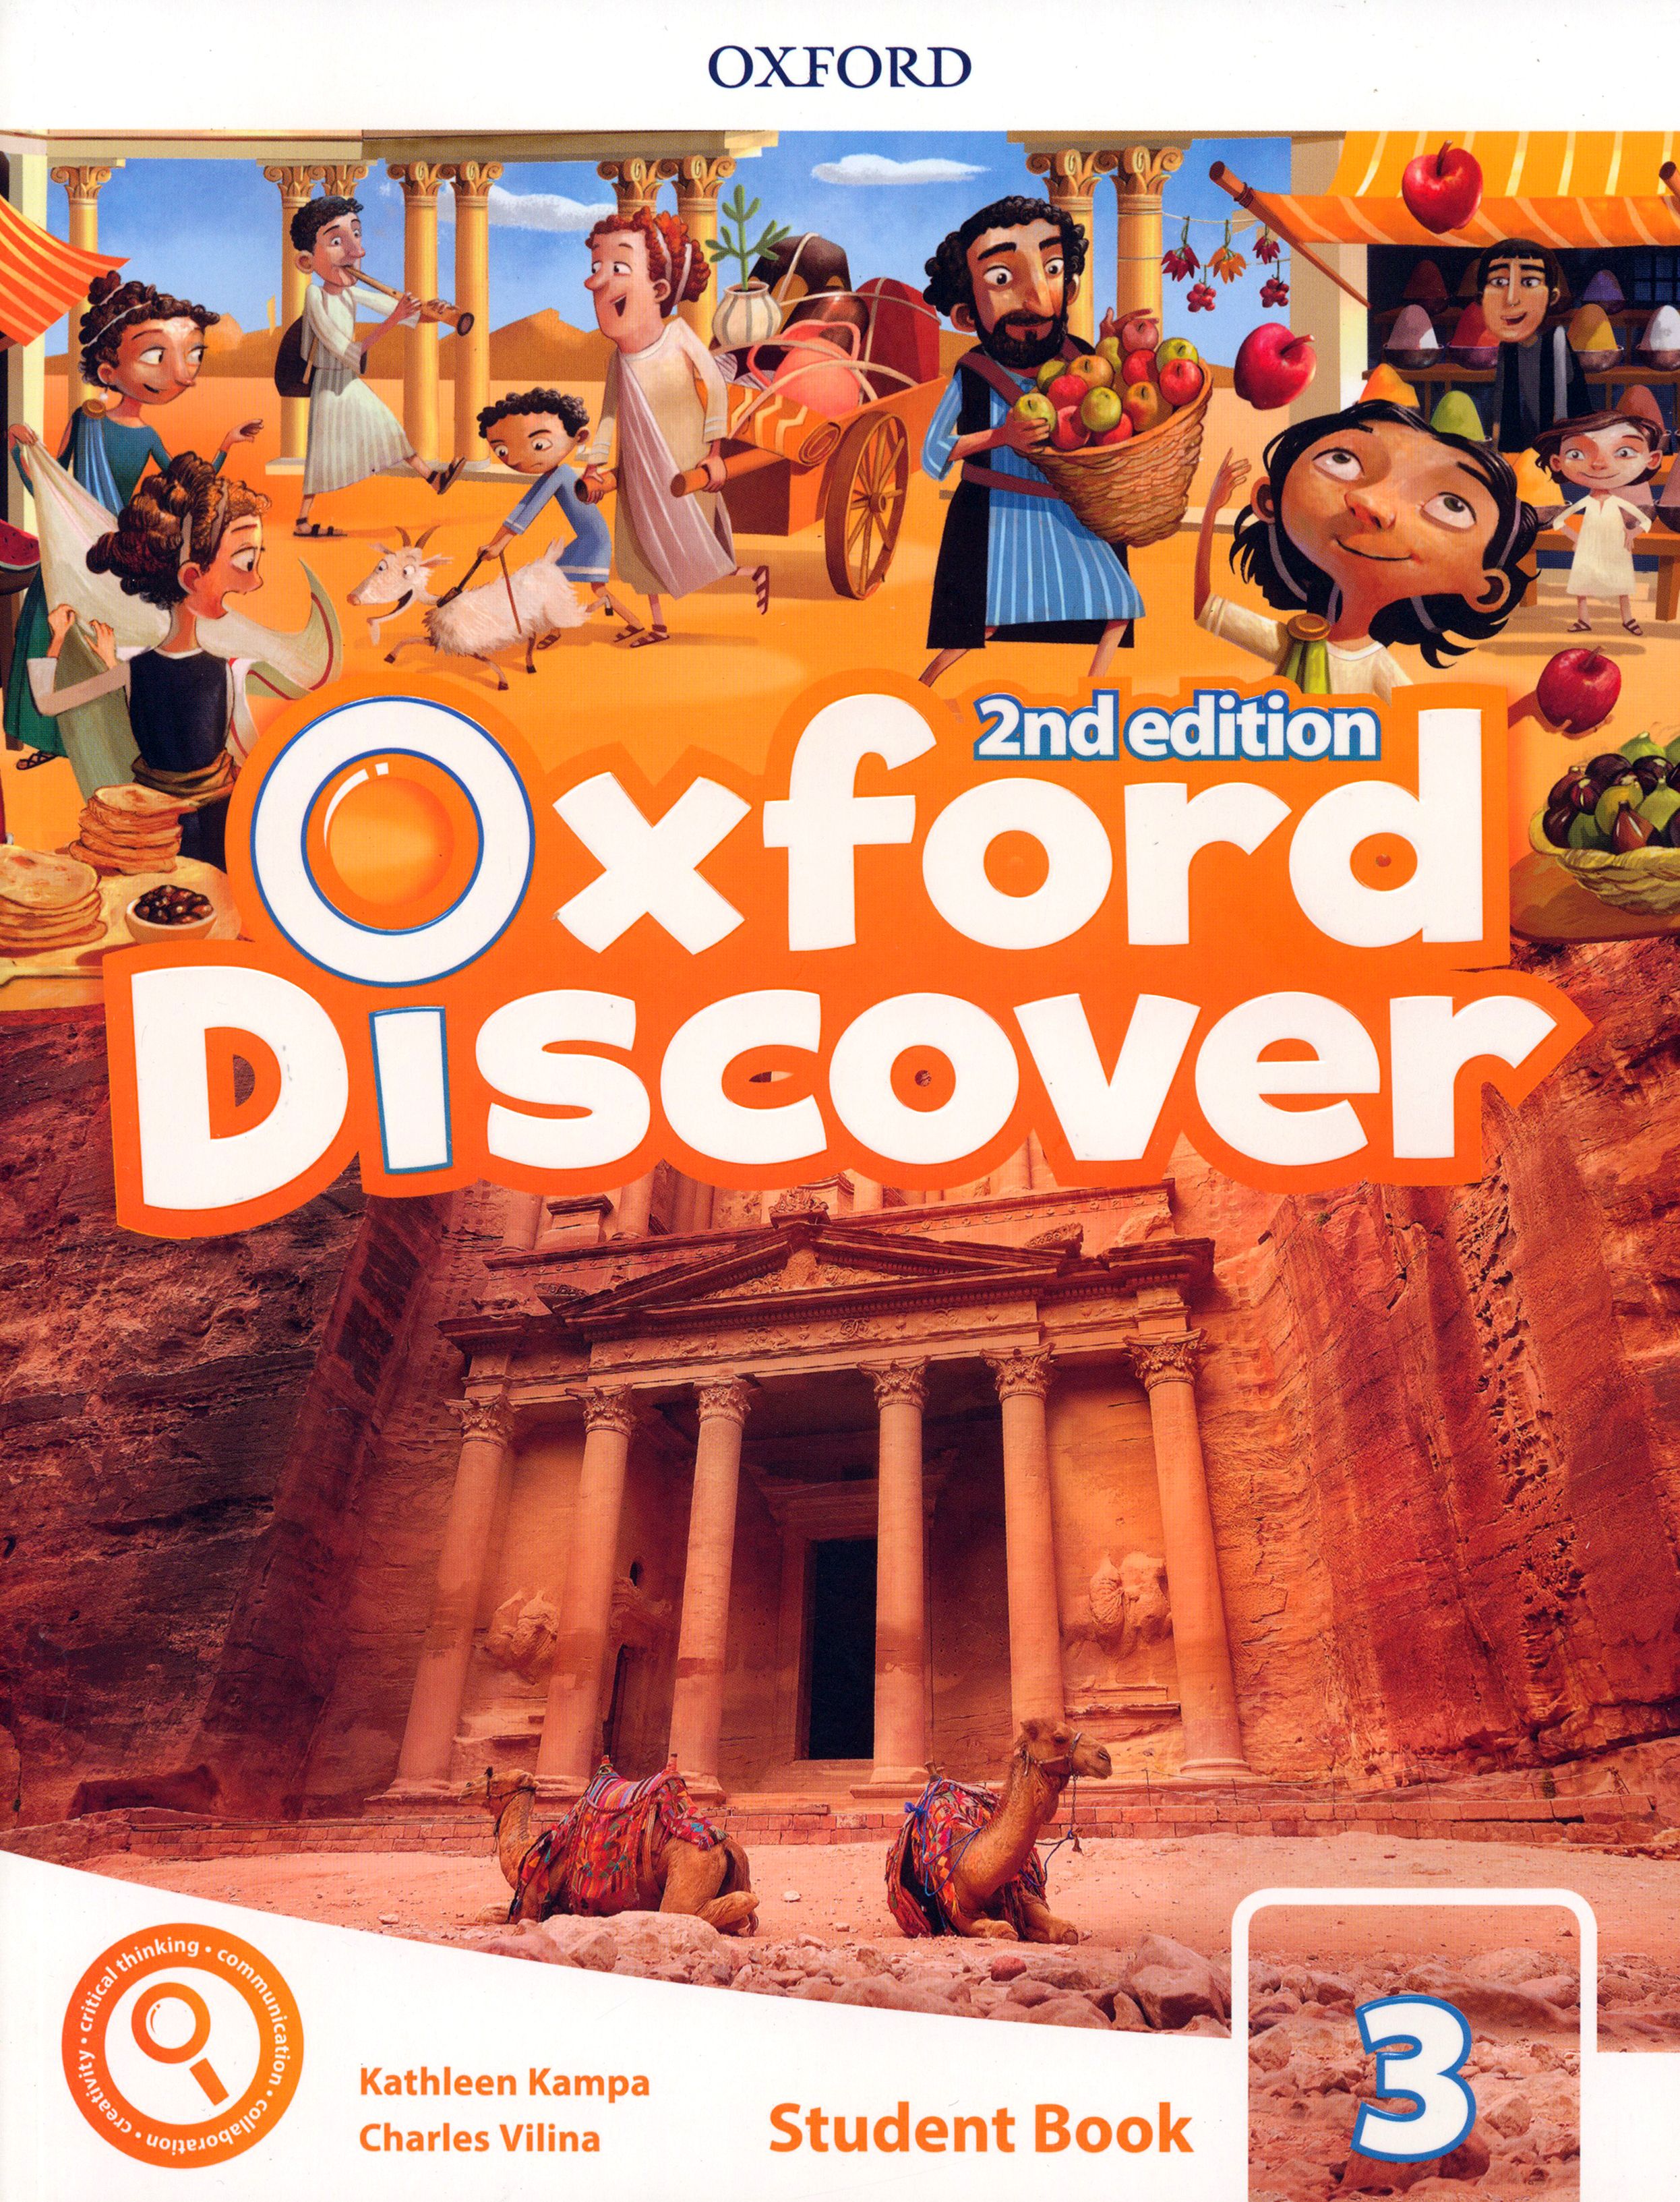 Discover workbook. Oxford discover (2nd Edition) 3 student's book. Oxford discover 1 student's book 2nd Edition. Oxford discover 1 student book 2nd Edition Audio. Oxford discover 1 (student’s book, Workbook).